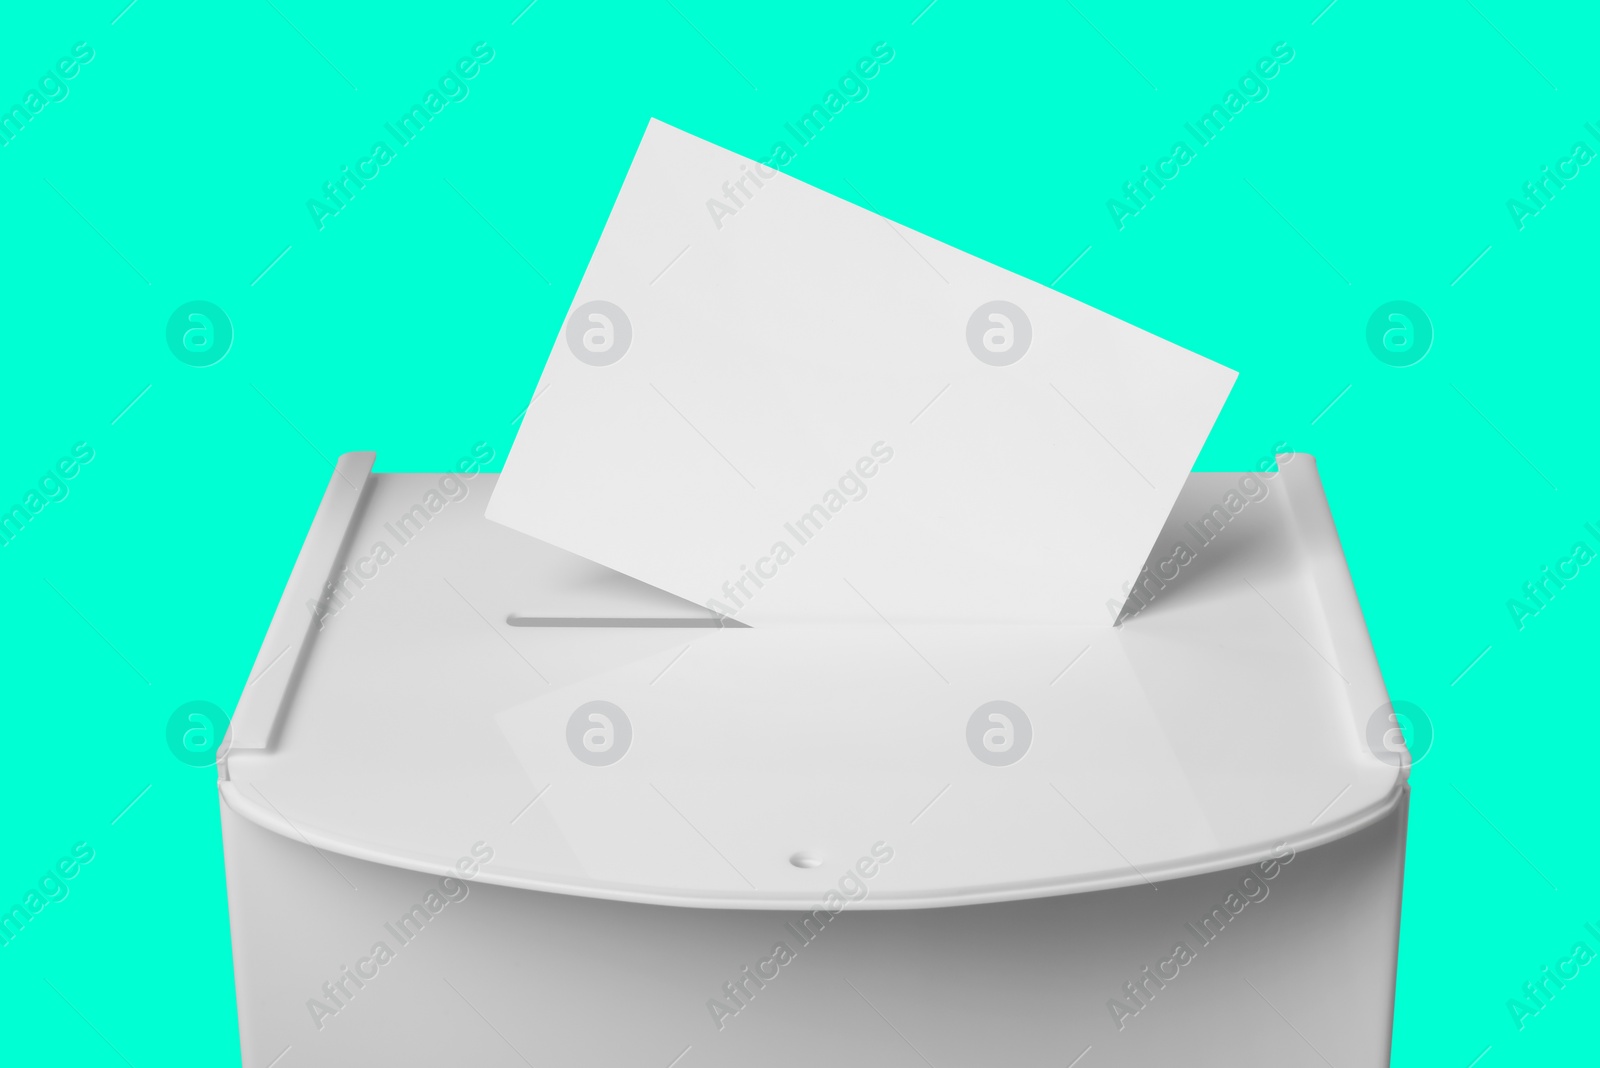 Image of Ballot box with vote on turquoise background. Election time